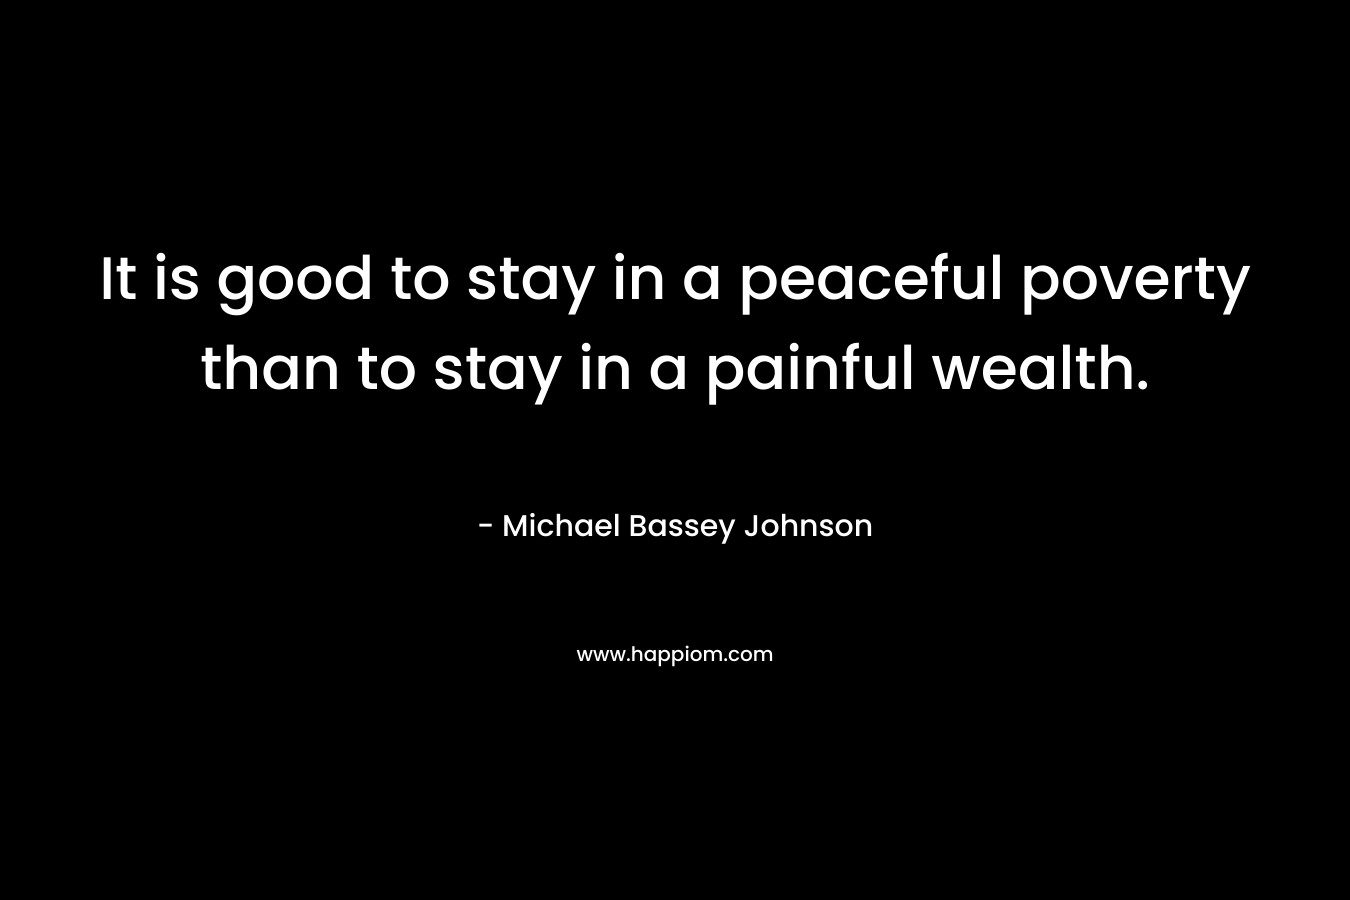 It is good to stay in a peaceful poverty than to stay in a painful wealth.